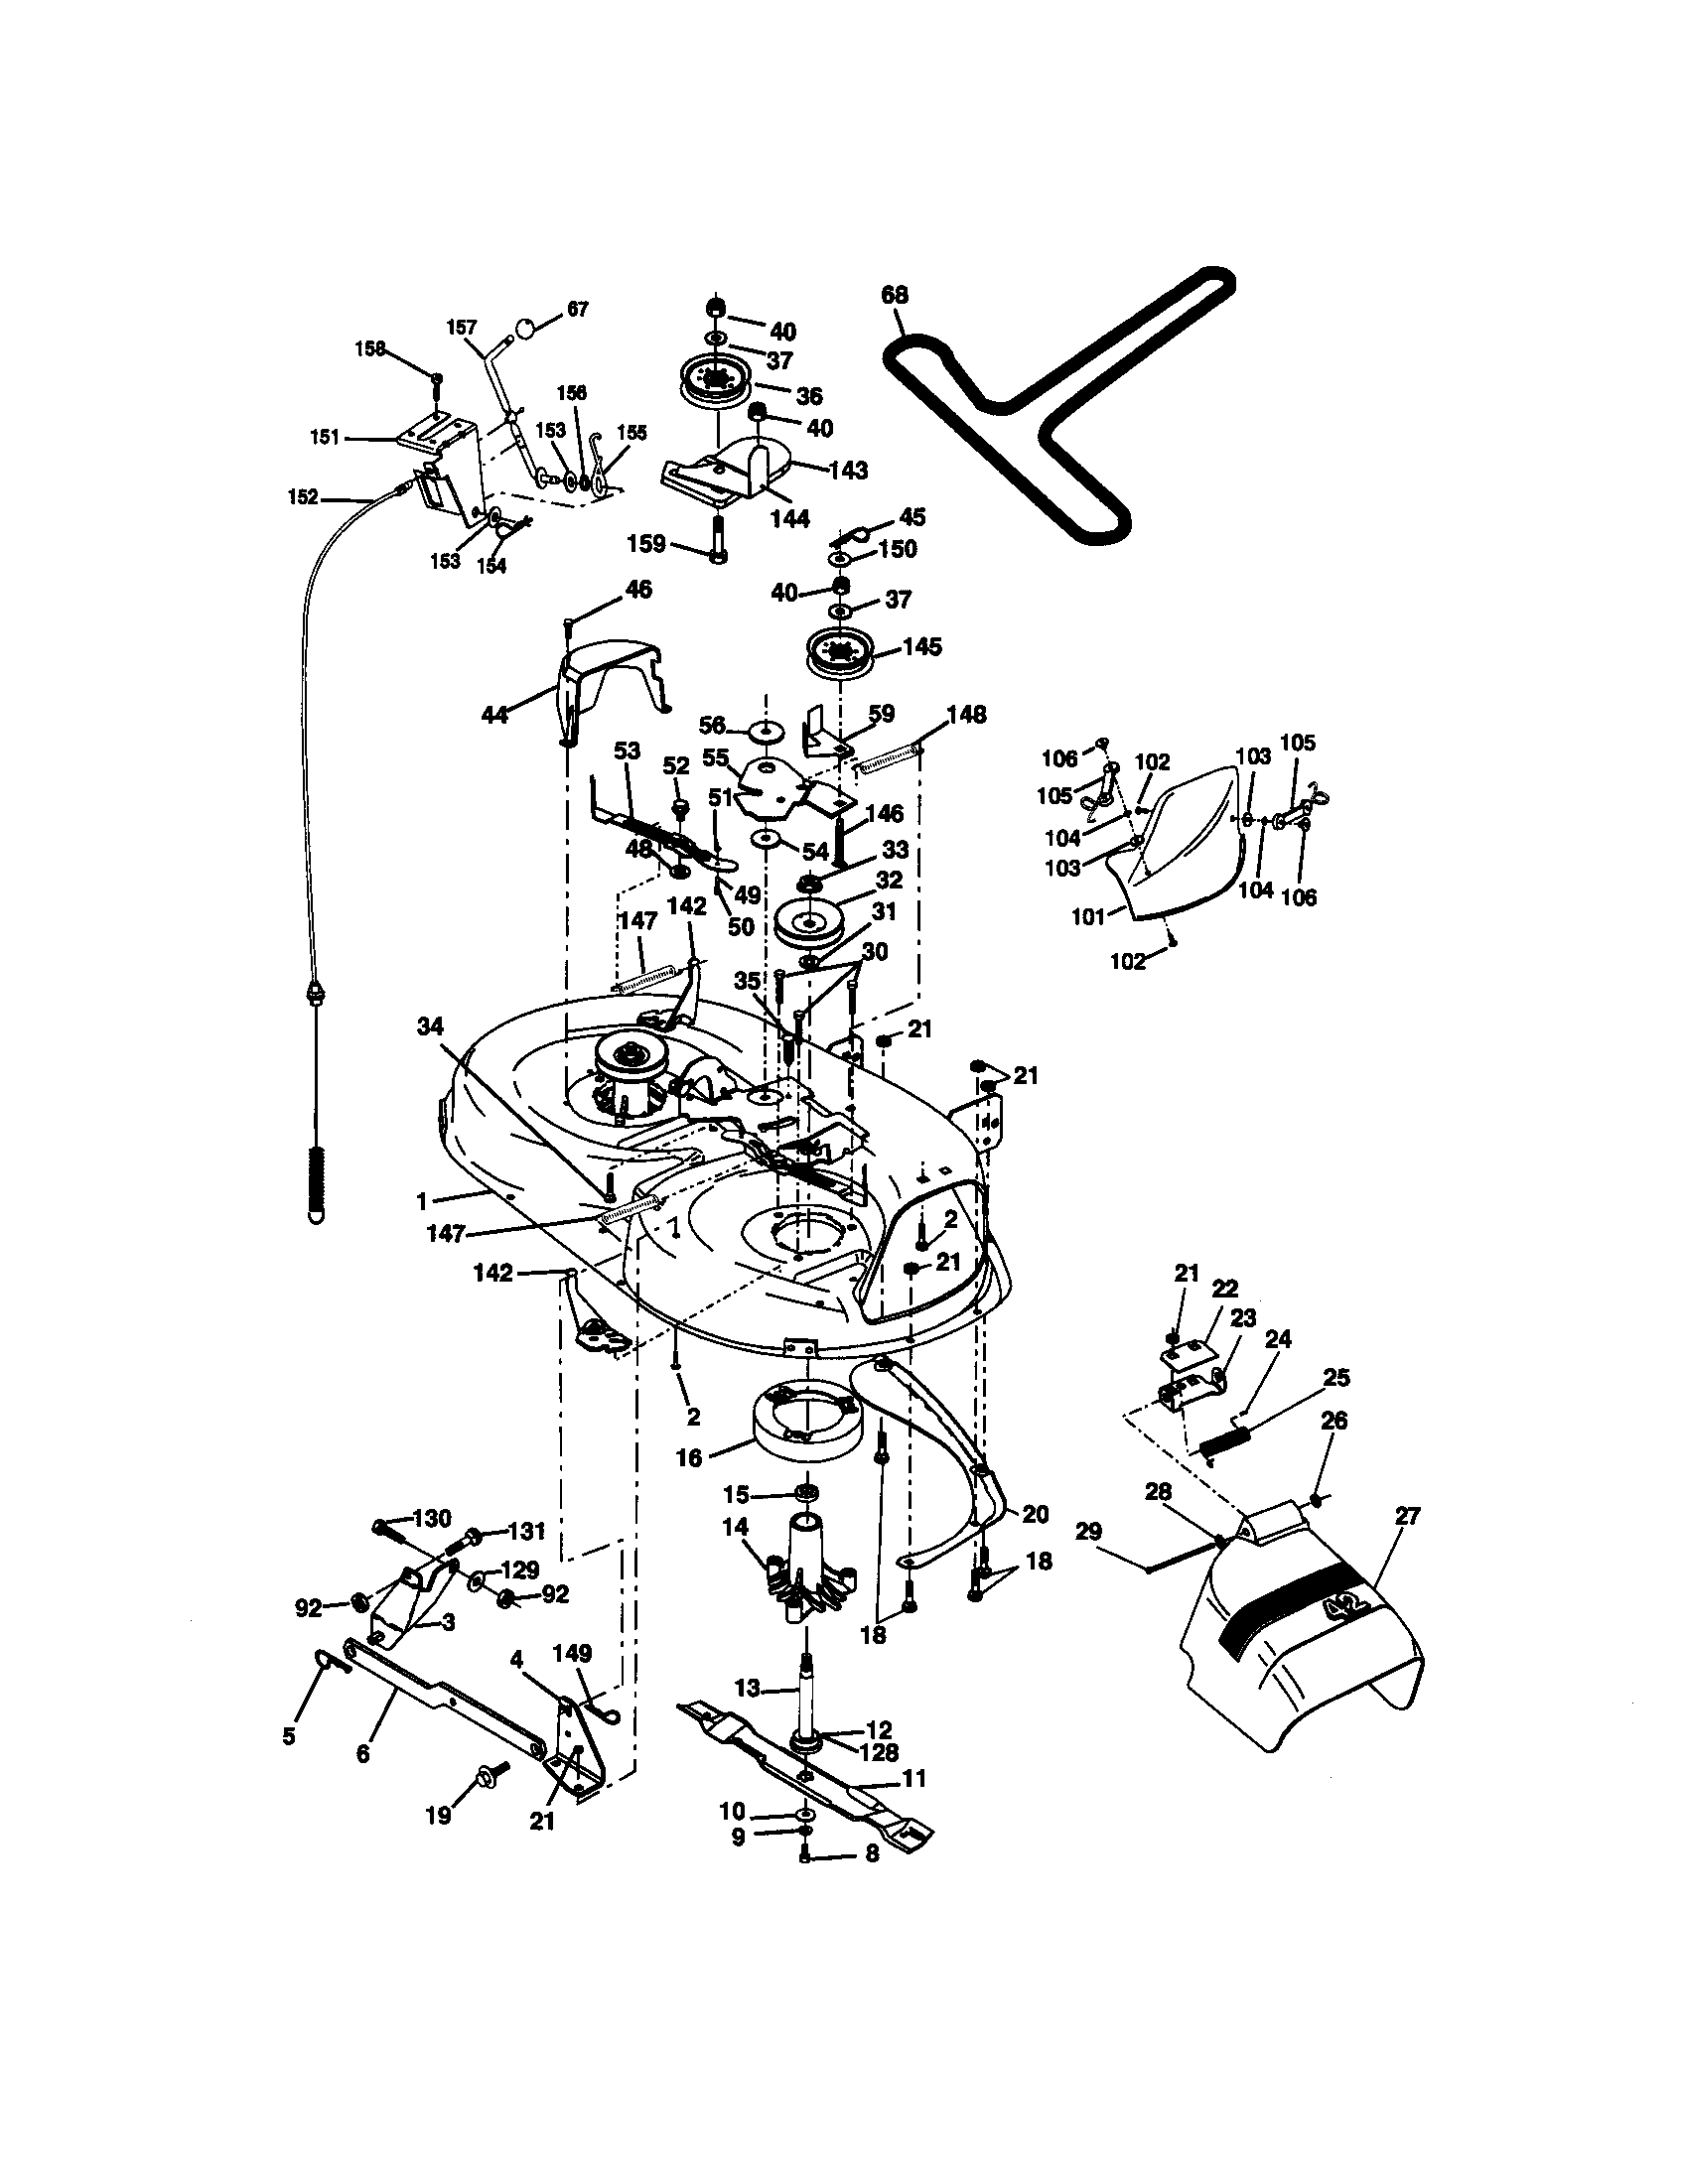 Craftsman Mower Wiring Diagram from c.searspartsdirect.com